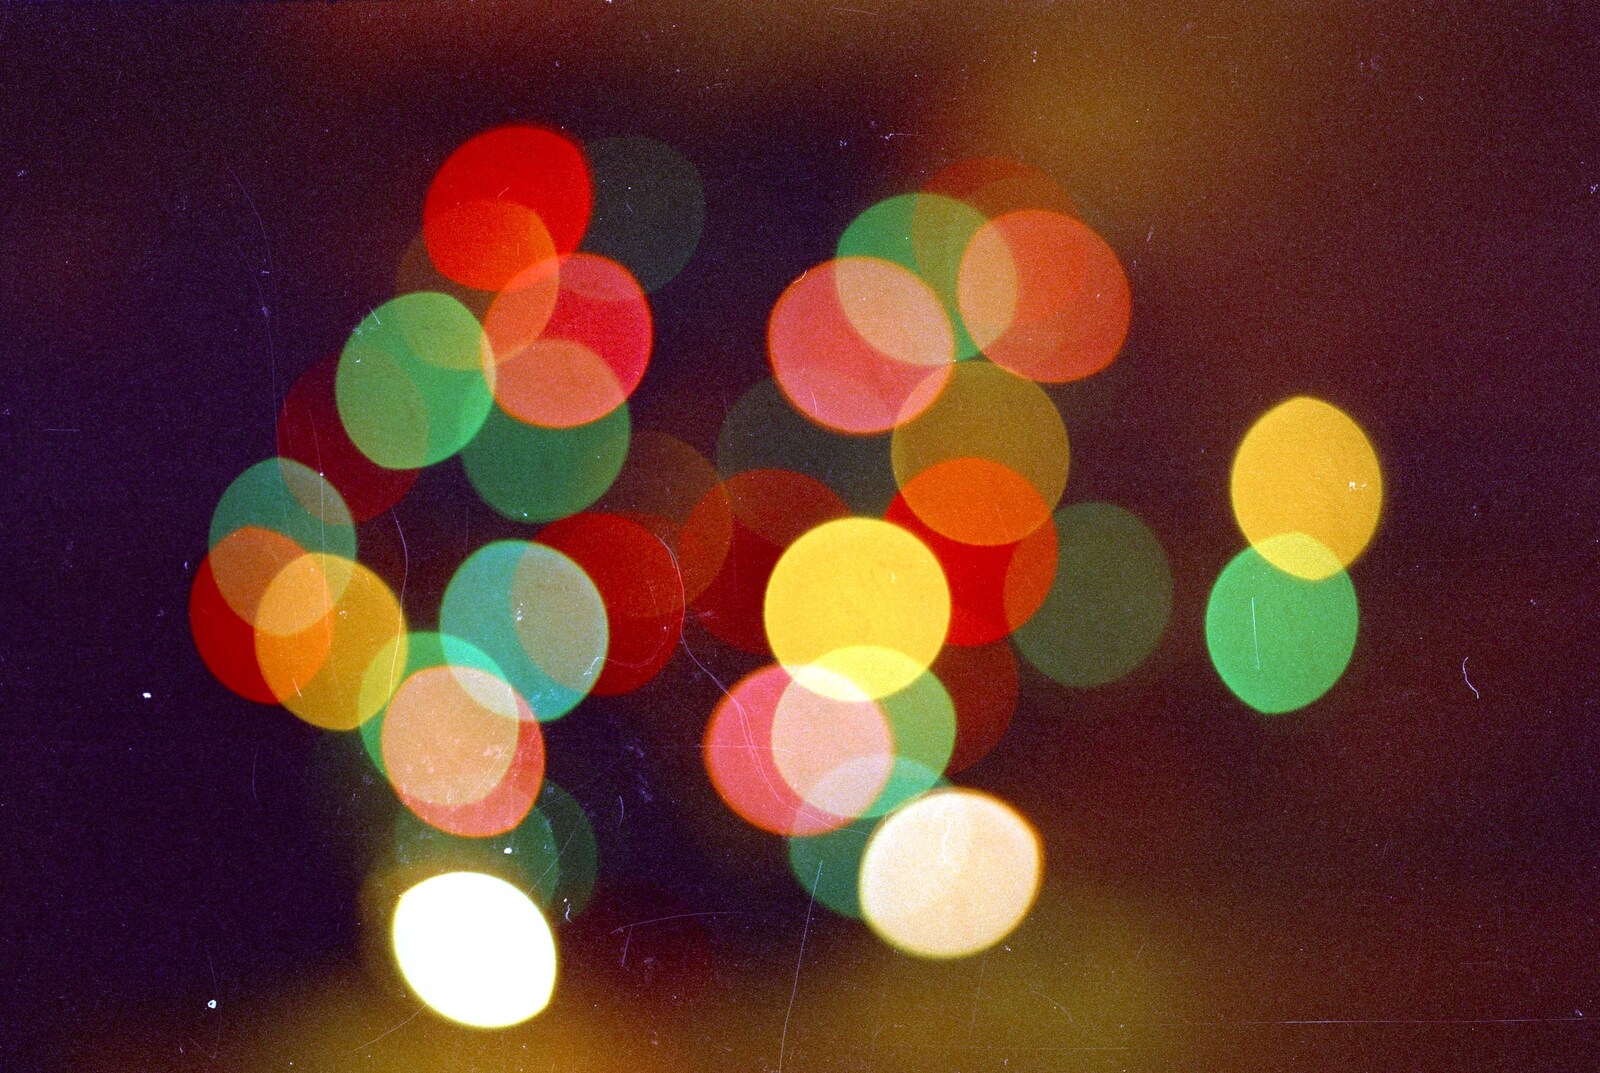 Out-of-focus Christmas lights from Christmas with Neil and Caroline, Burton, Dorset - 25th December 1986